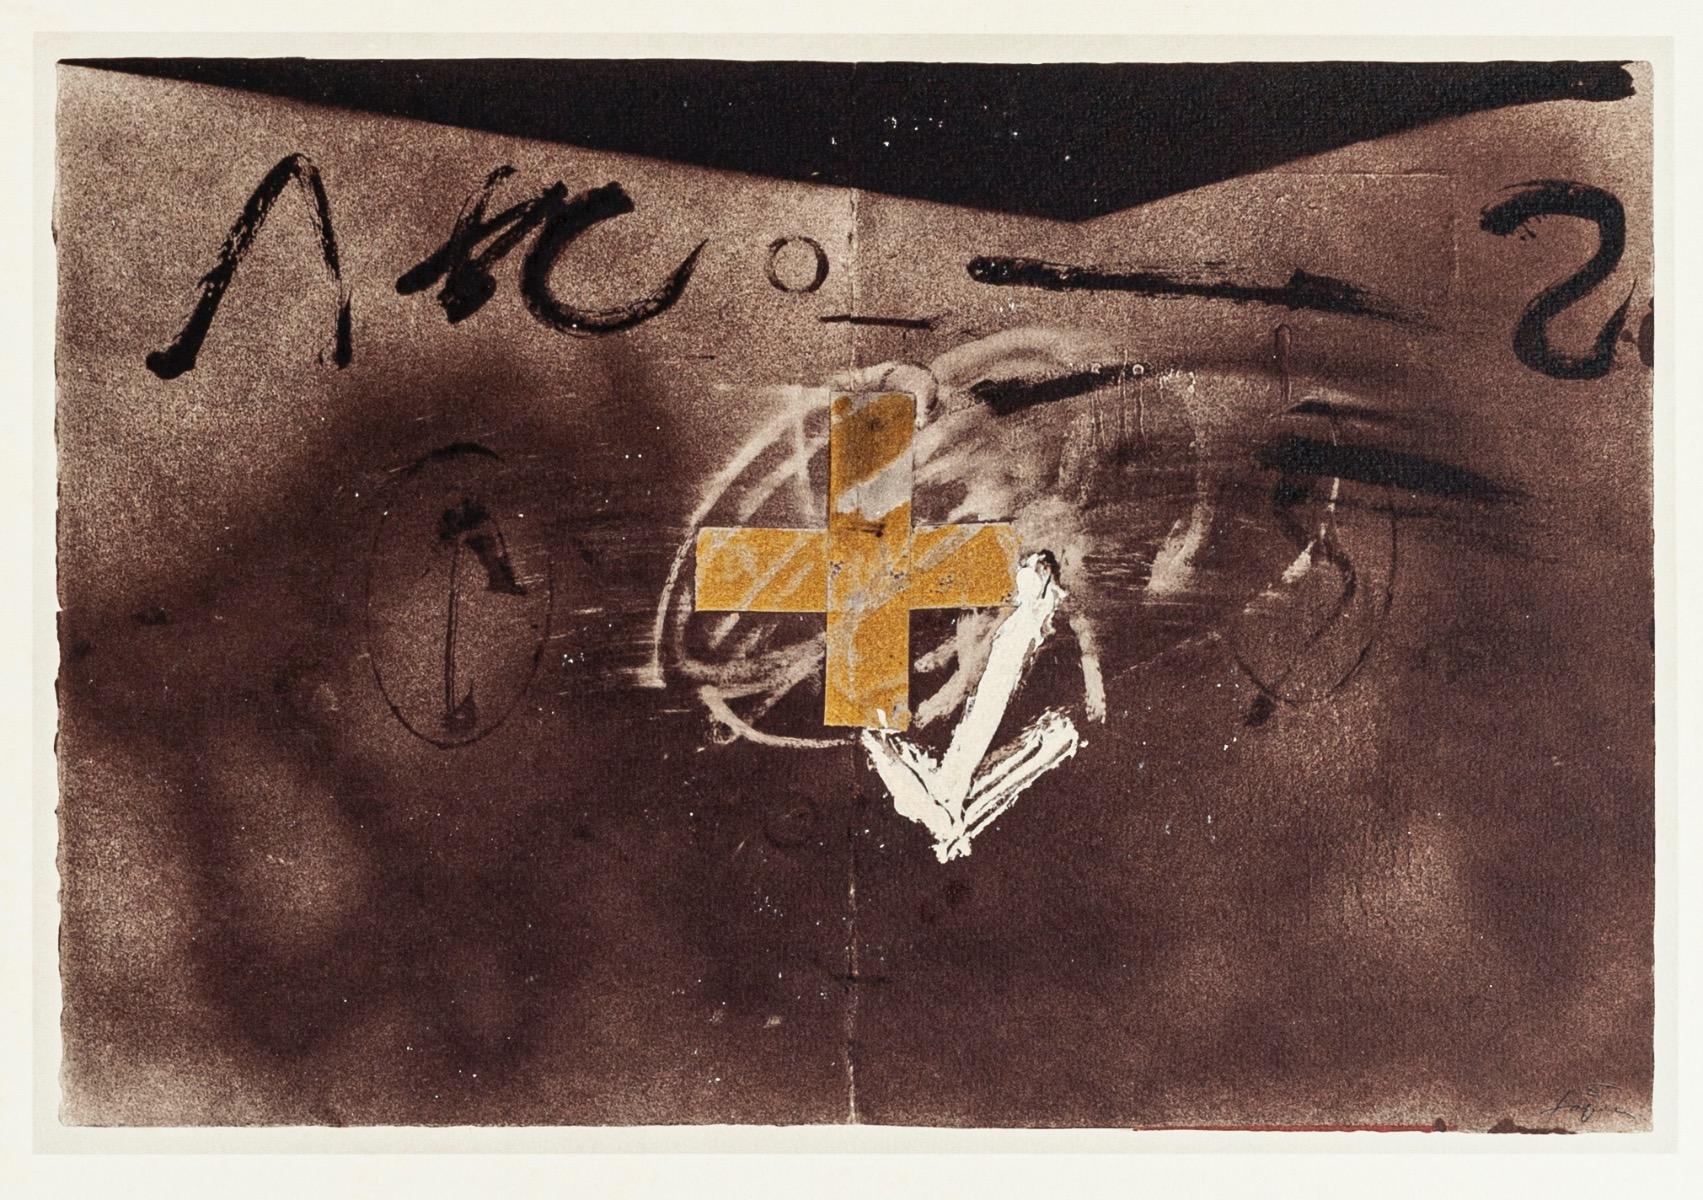 Antoni Tàpies (after) Abstract Print - Collage with Cross and Arrow - Vintage Offset Print After Antoni Tàpies - 1982